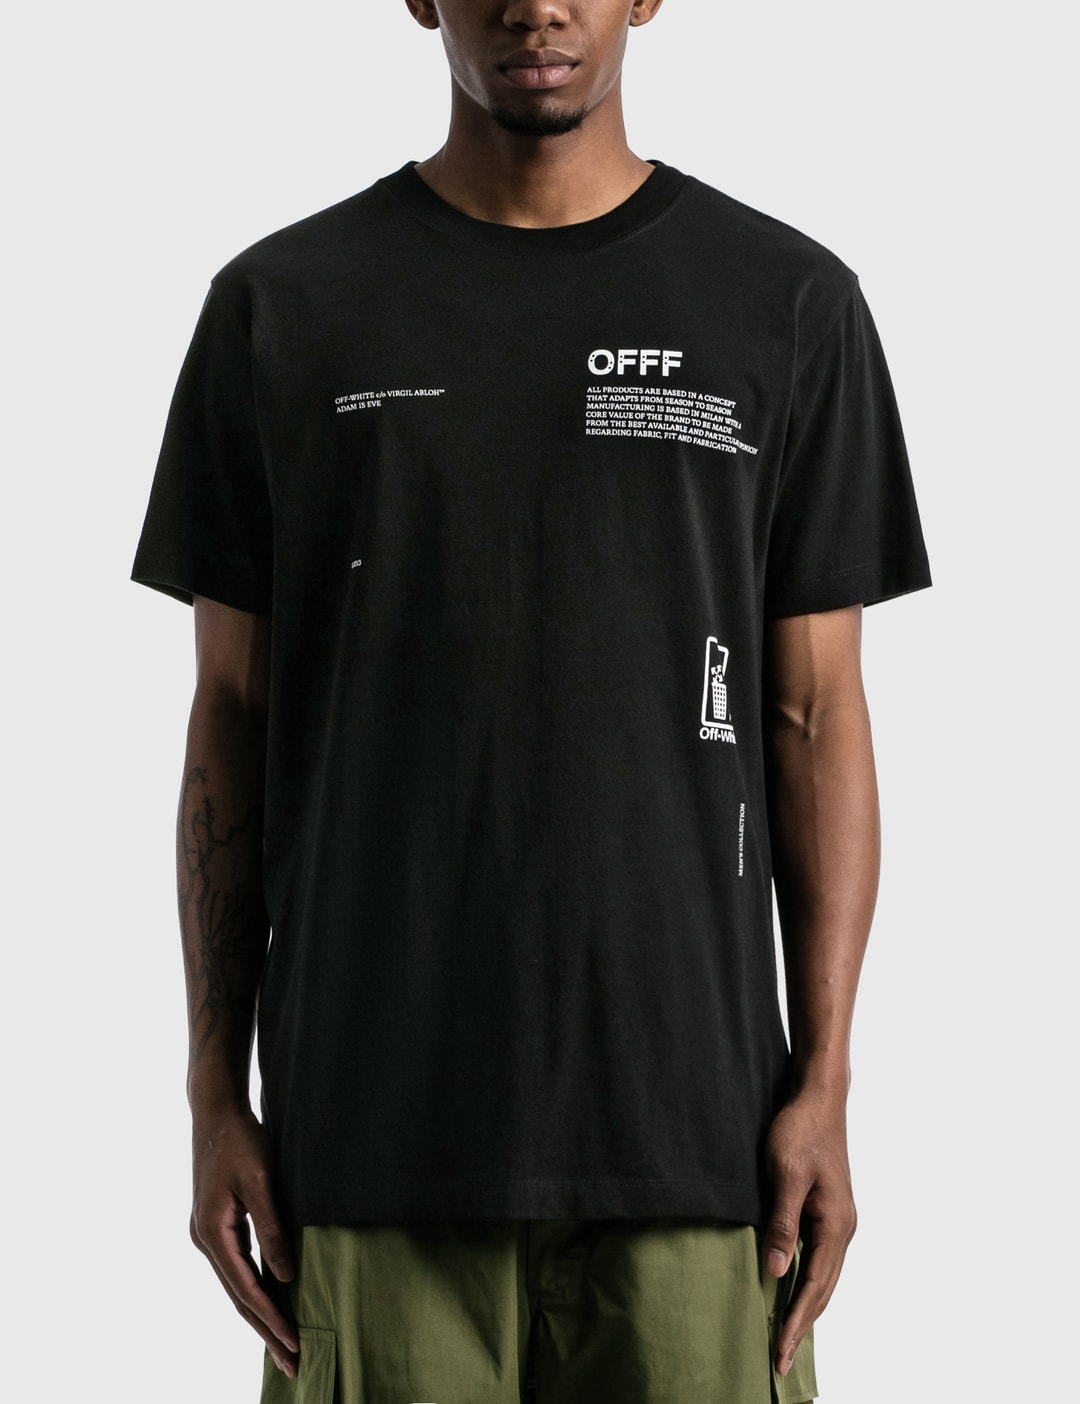 Off-White™ - Take Care Lifestyle Arrow by Fashion Hypebeast - Slim HBX | Globally Curated and T-shirt